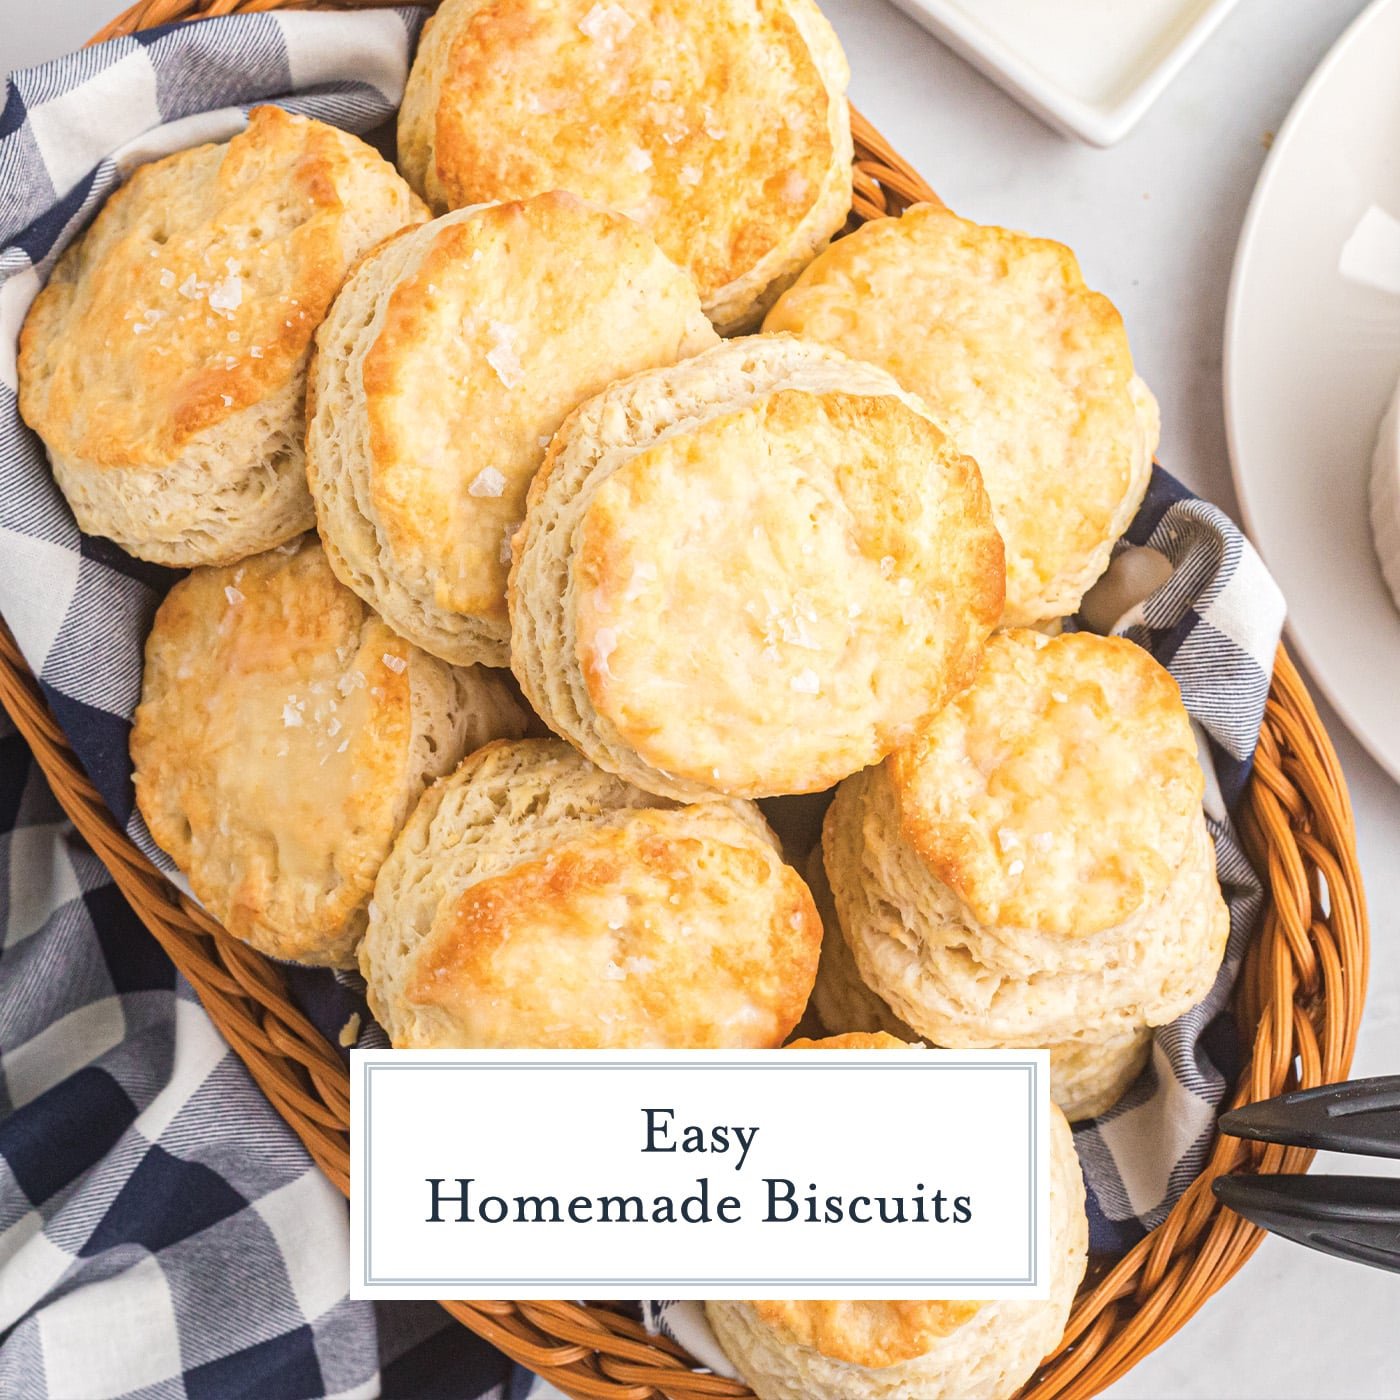 Overhead of biscuits in a basket with text overlay saying "easy homemade biscuits"